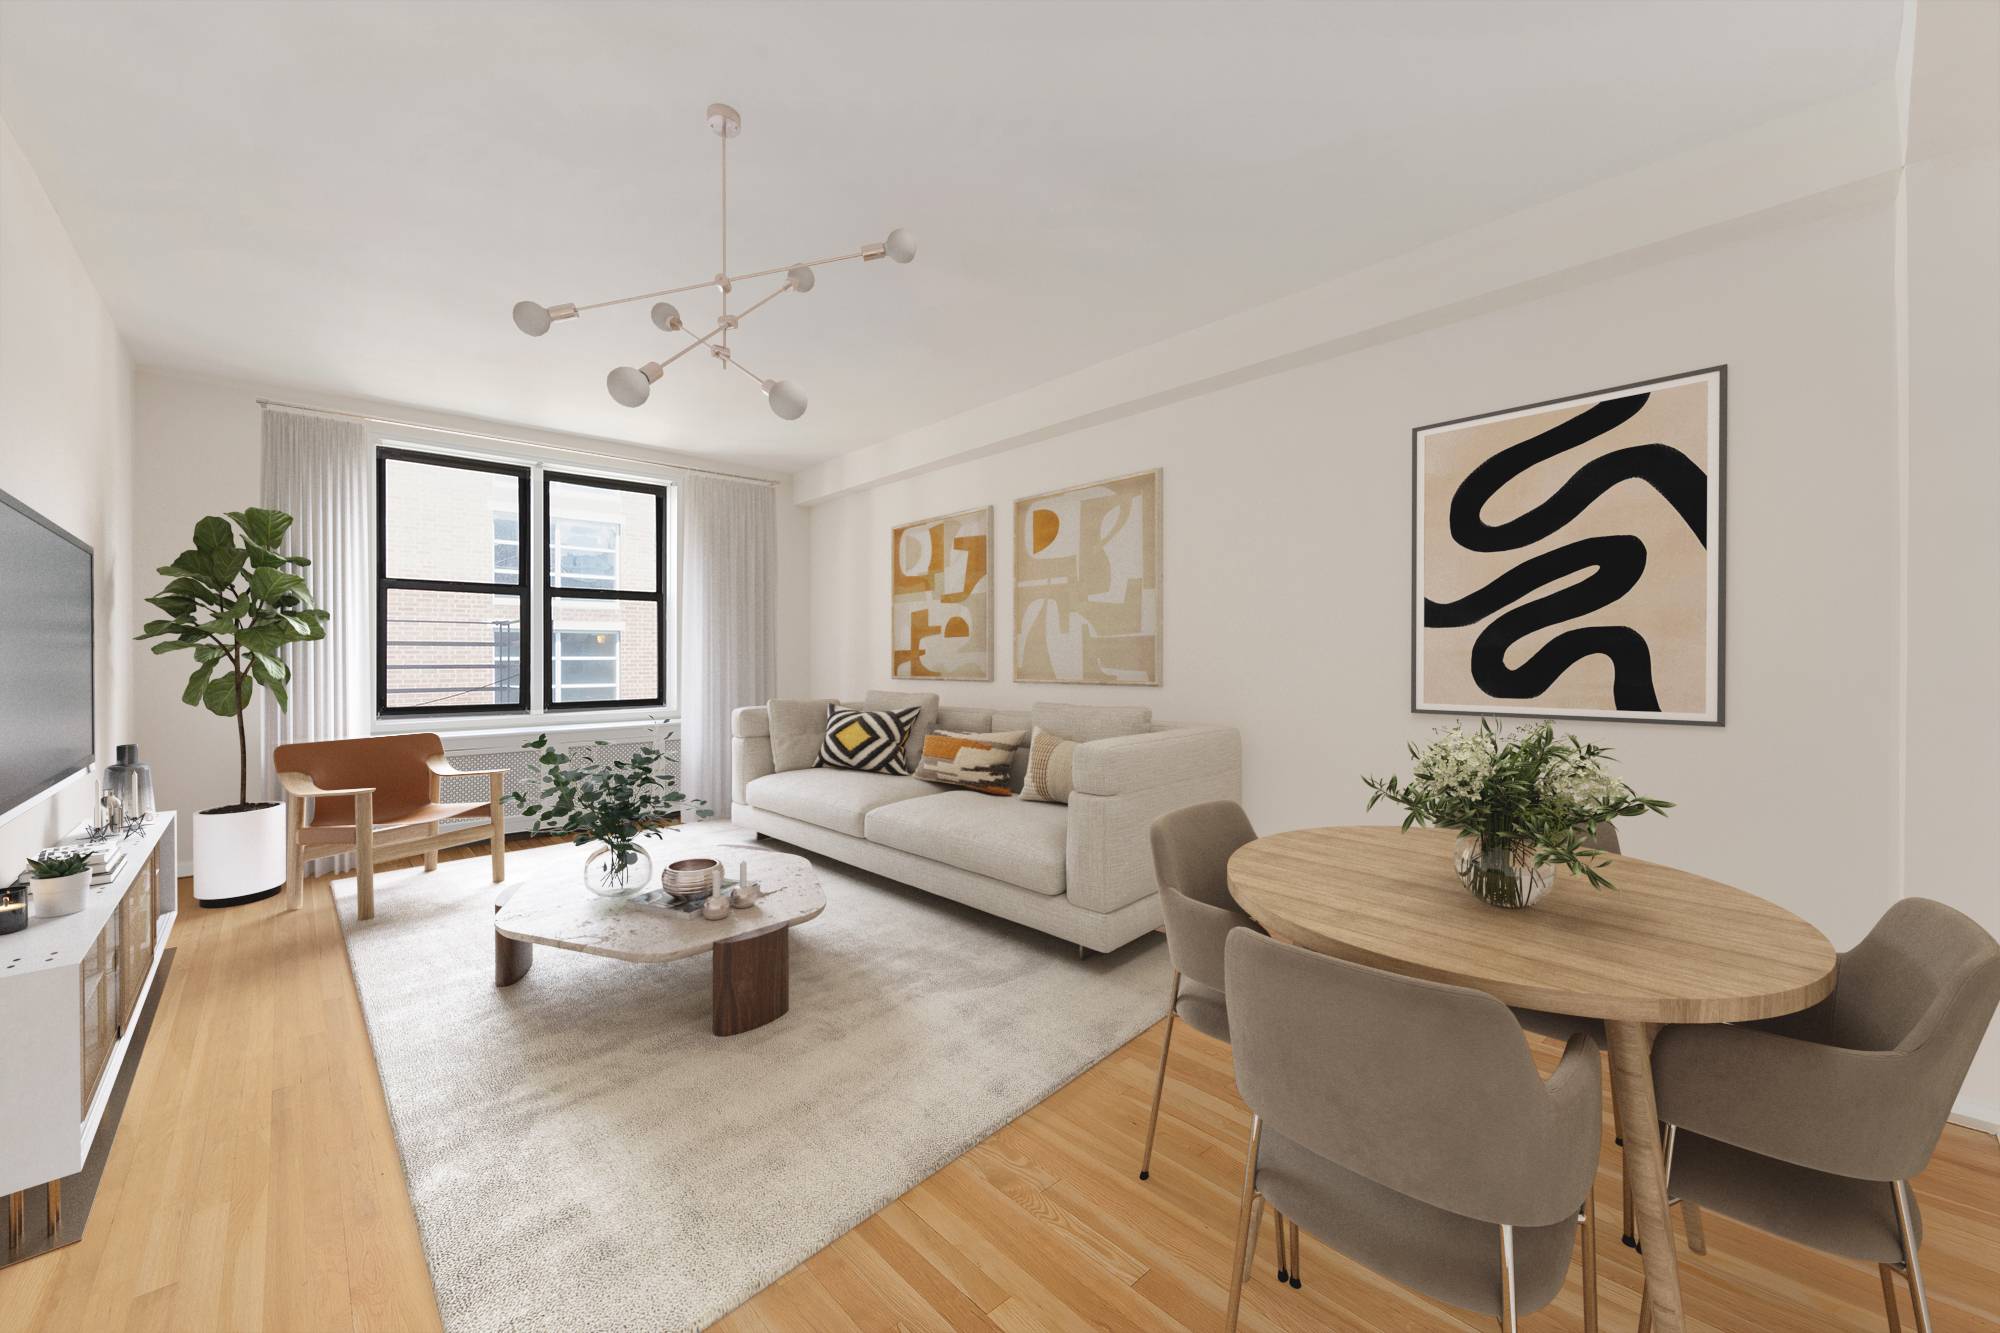 Unit 6W is a rare opportunity to buy a prime Gramercy Park co op and make the space your own !